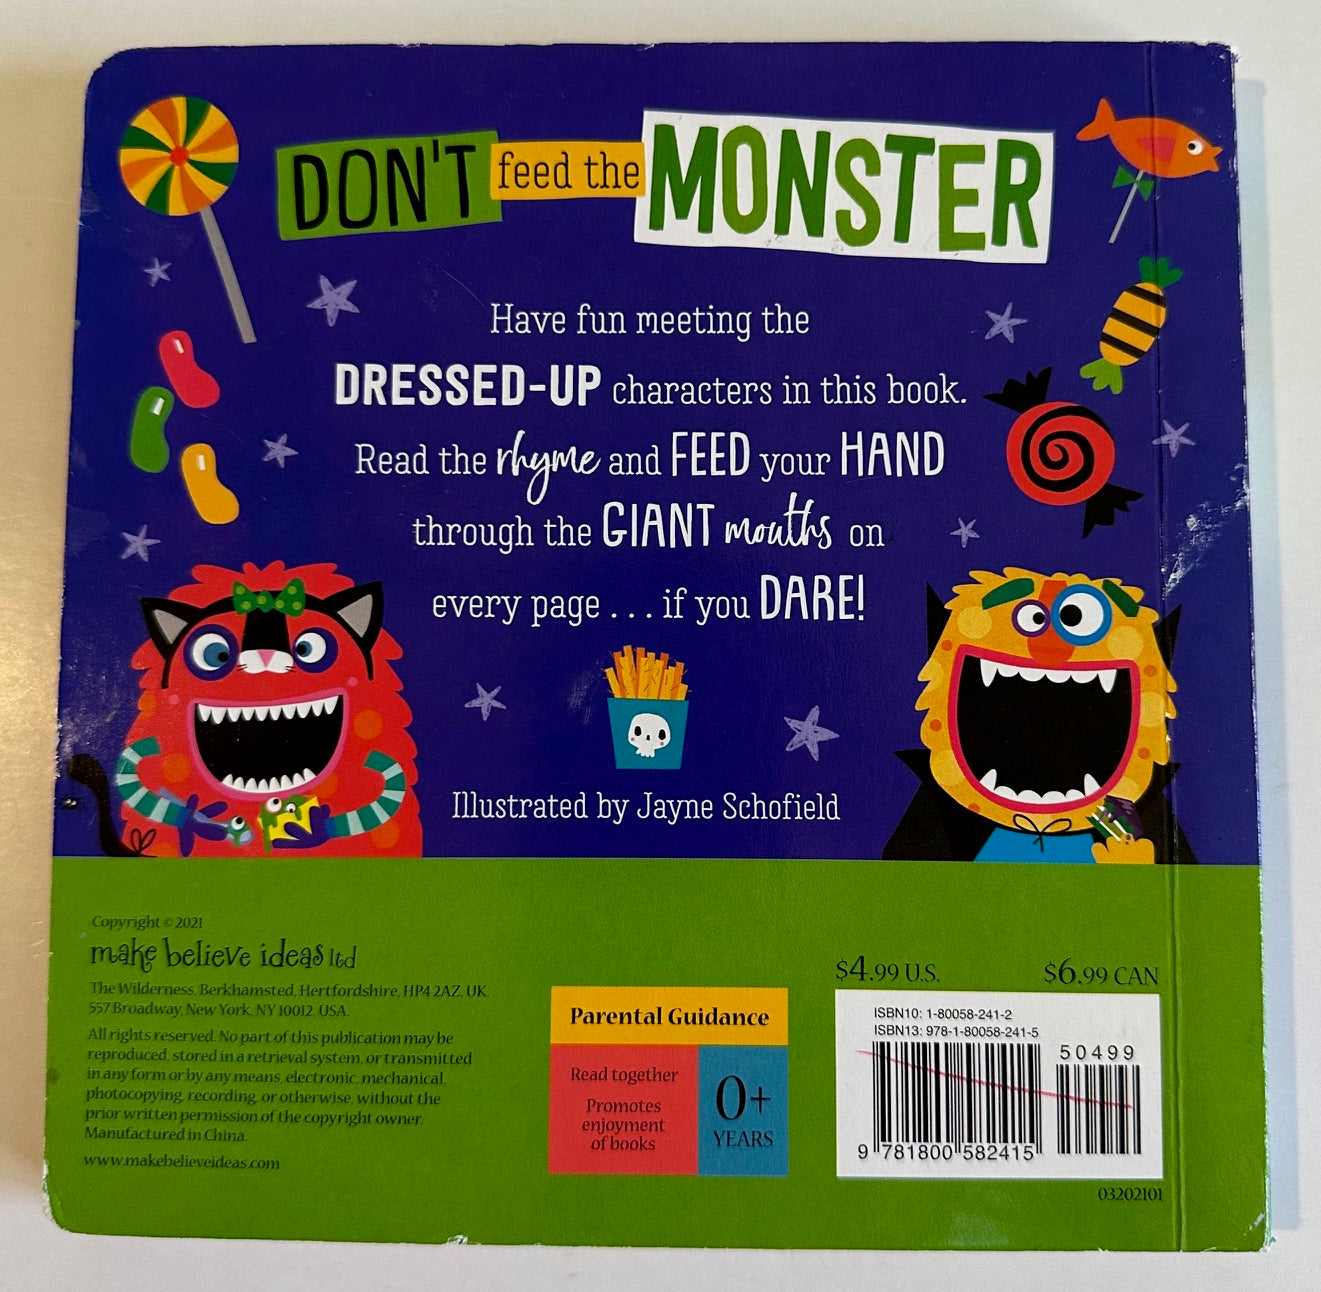 "Don't Feed the Monster"